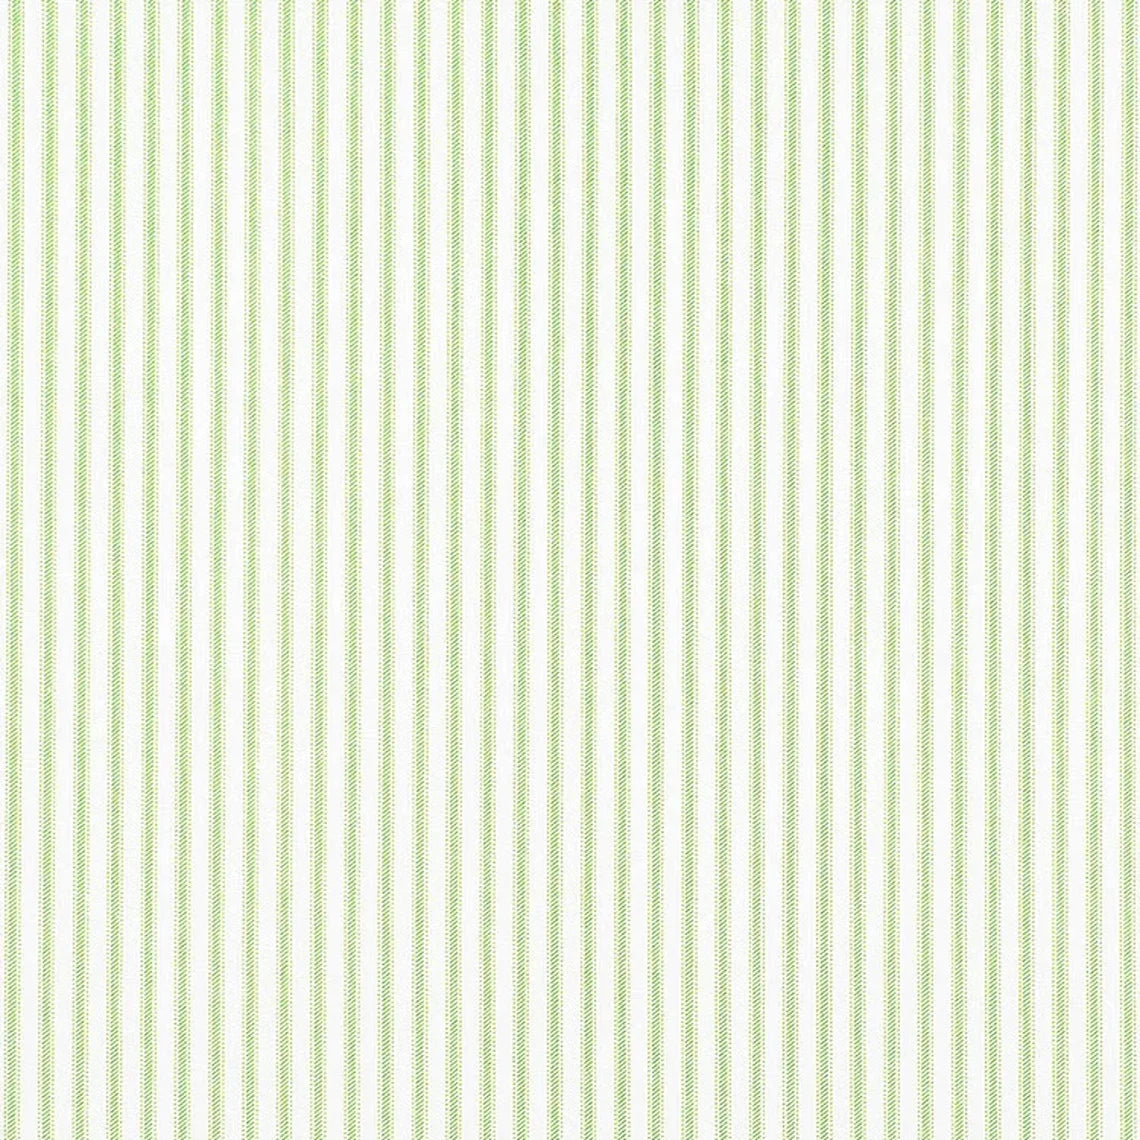 tailored bedskirt in classic kiwi green ticking stripe on white